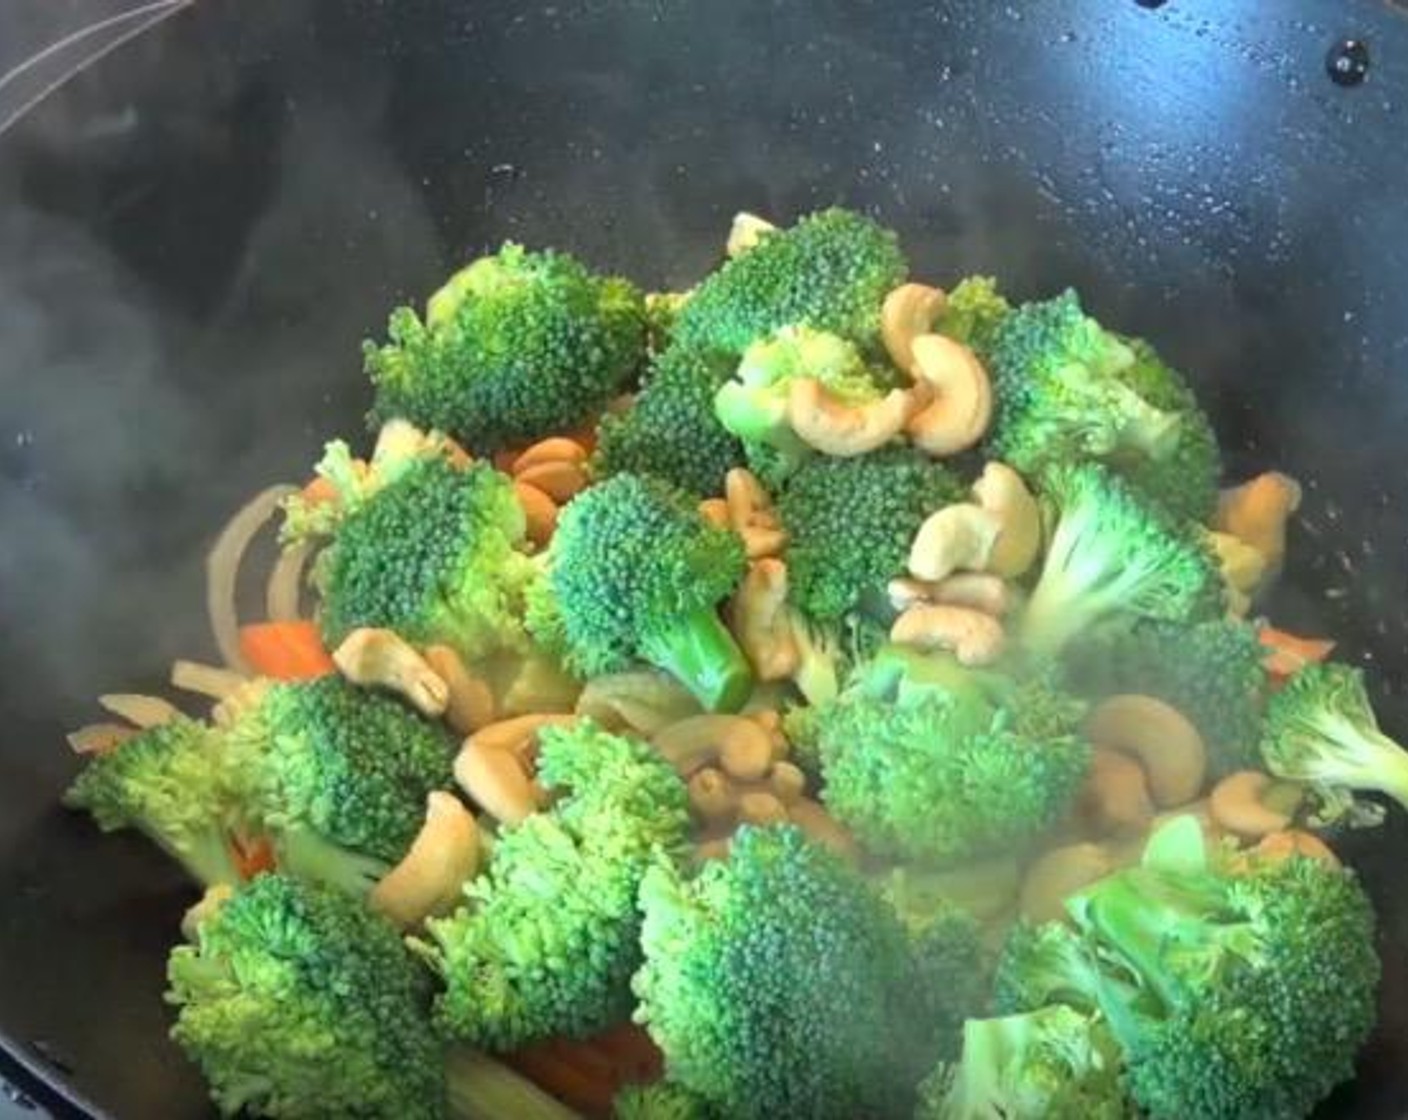 step 5 Add Garlic (2 cloves), Baby Corn (1/2 cup), Broccoli Florets (2 3/4 cups) and Unsalted Cashews (1/2 cup). Stir fry for 2-3 minutes, or until vegetables are tender.